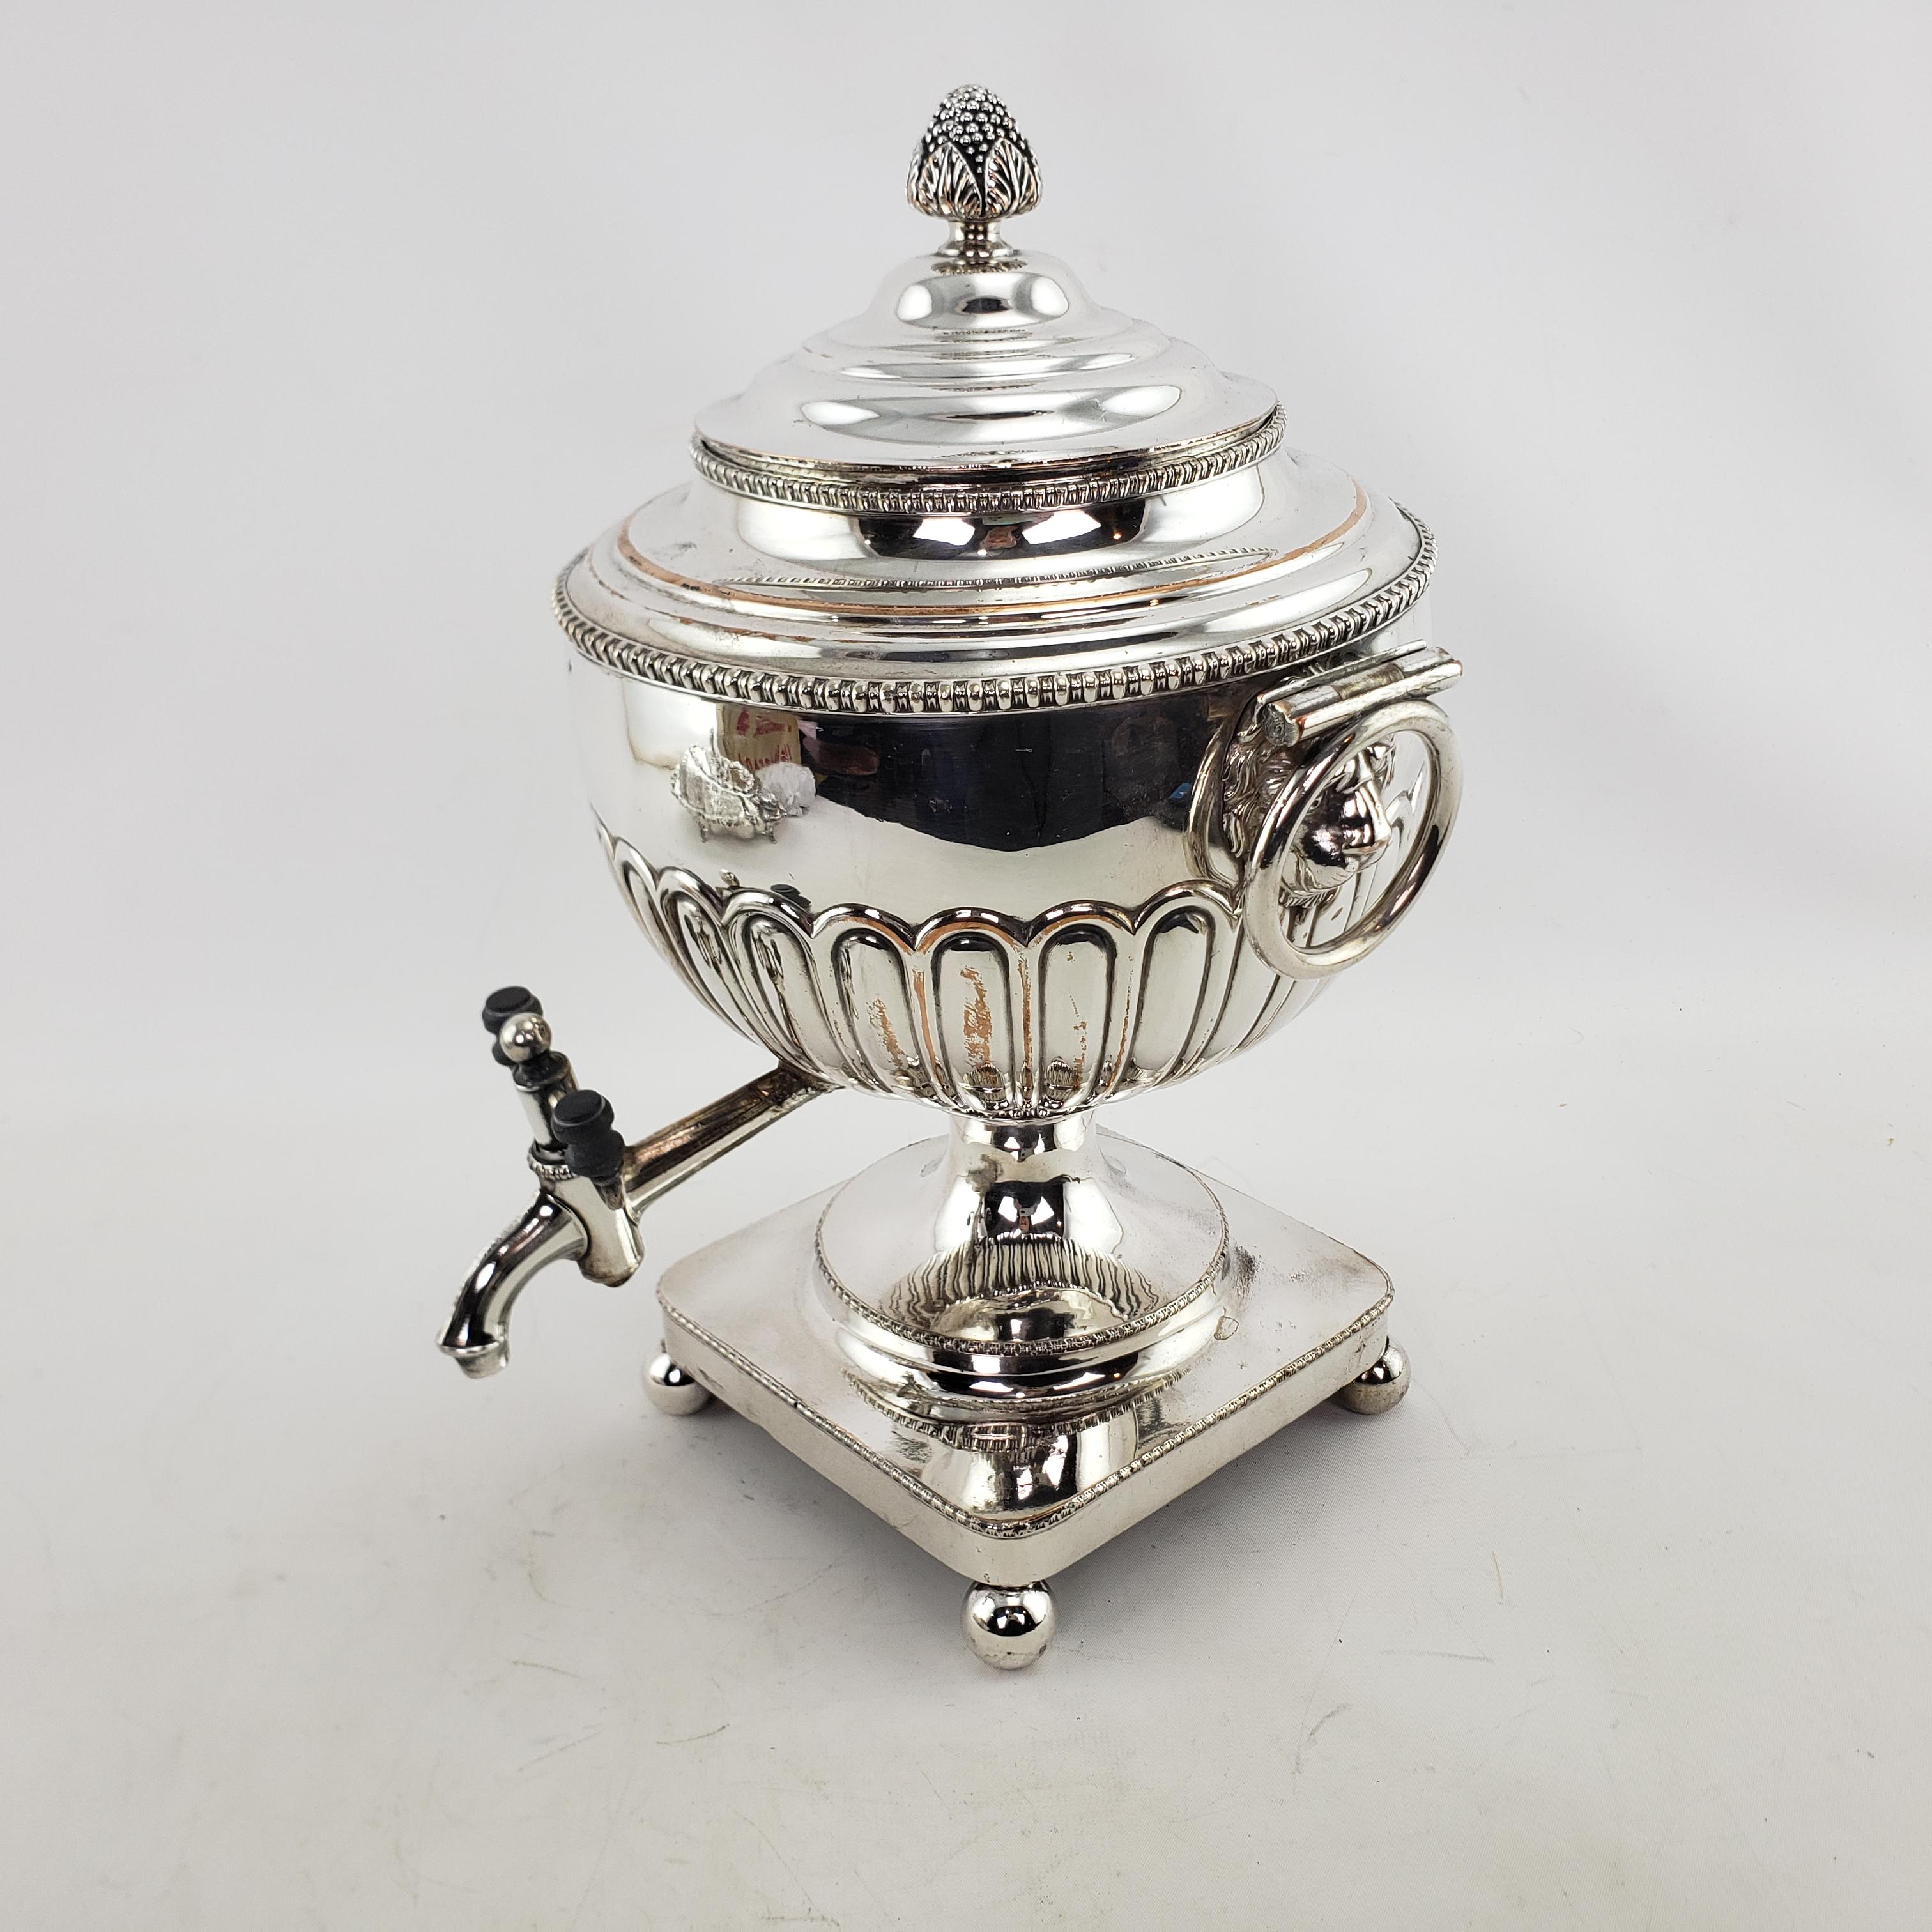 English Antique Georgian Styled Silver Plated Tea or Hot Water Urn with Lion Mounts For Sale